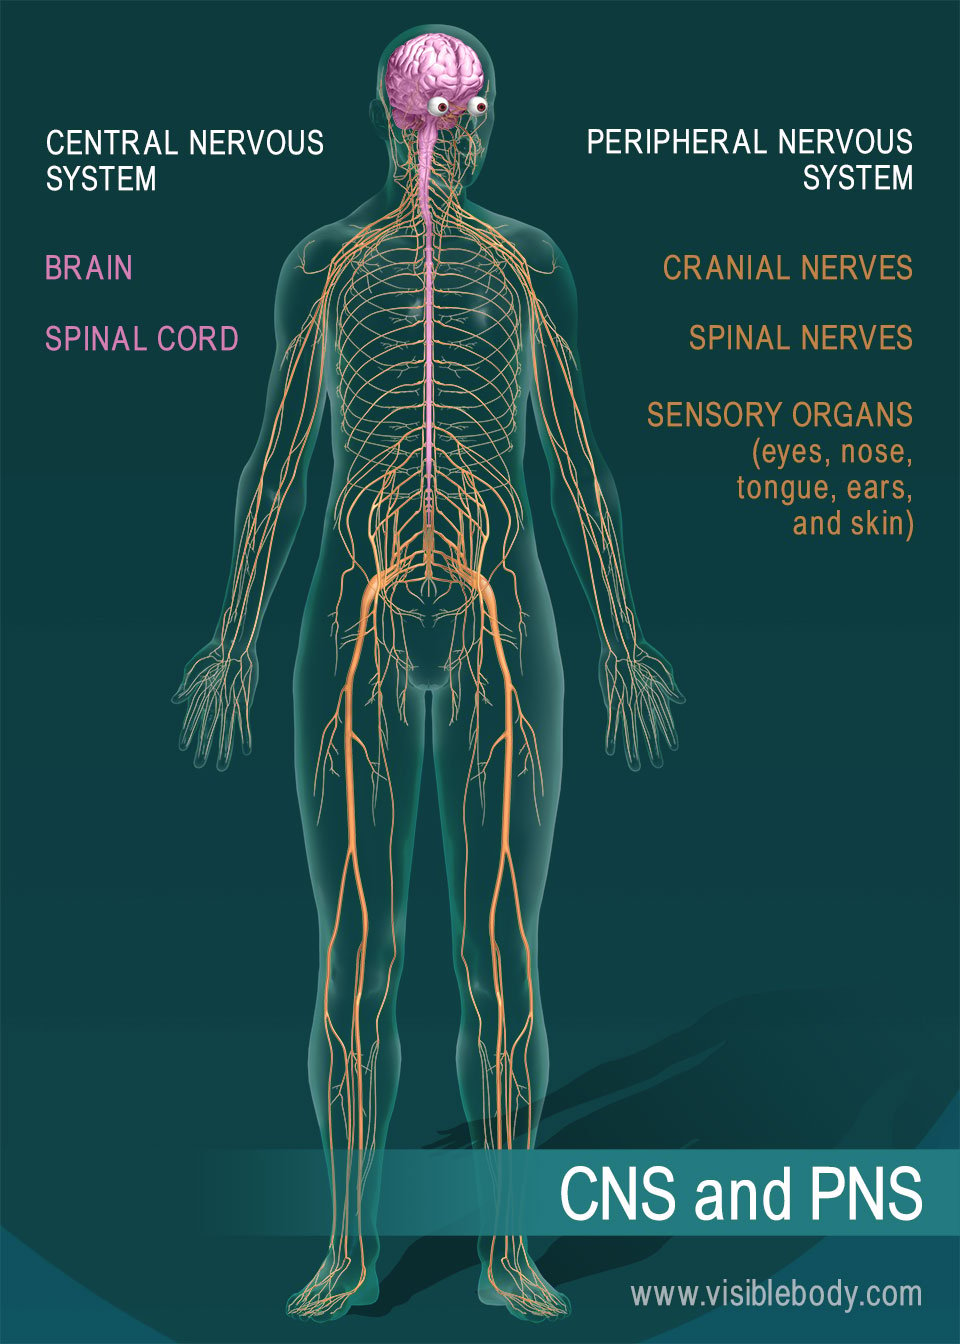 How do nerves control every organ and function in the body?